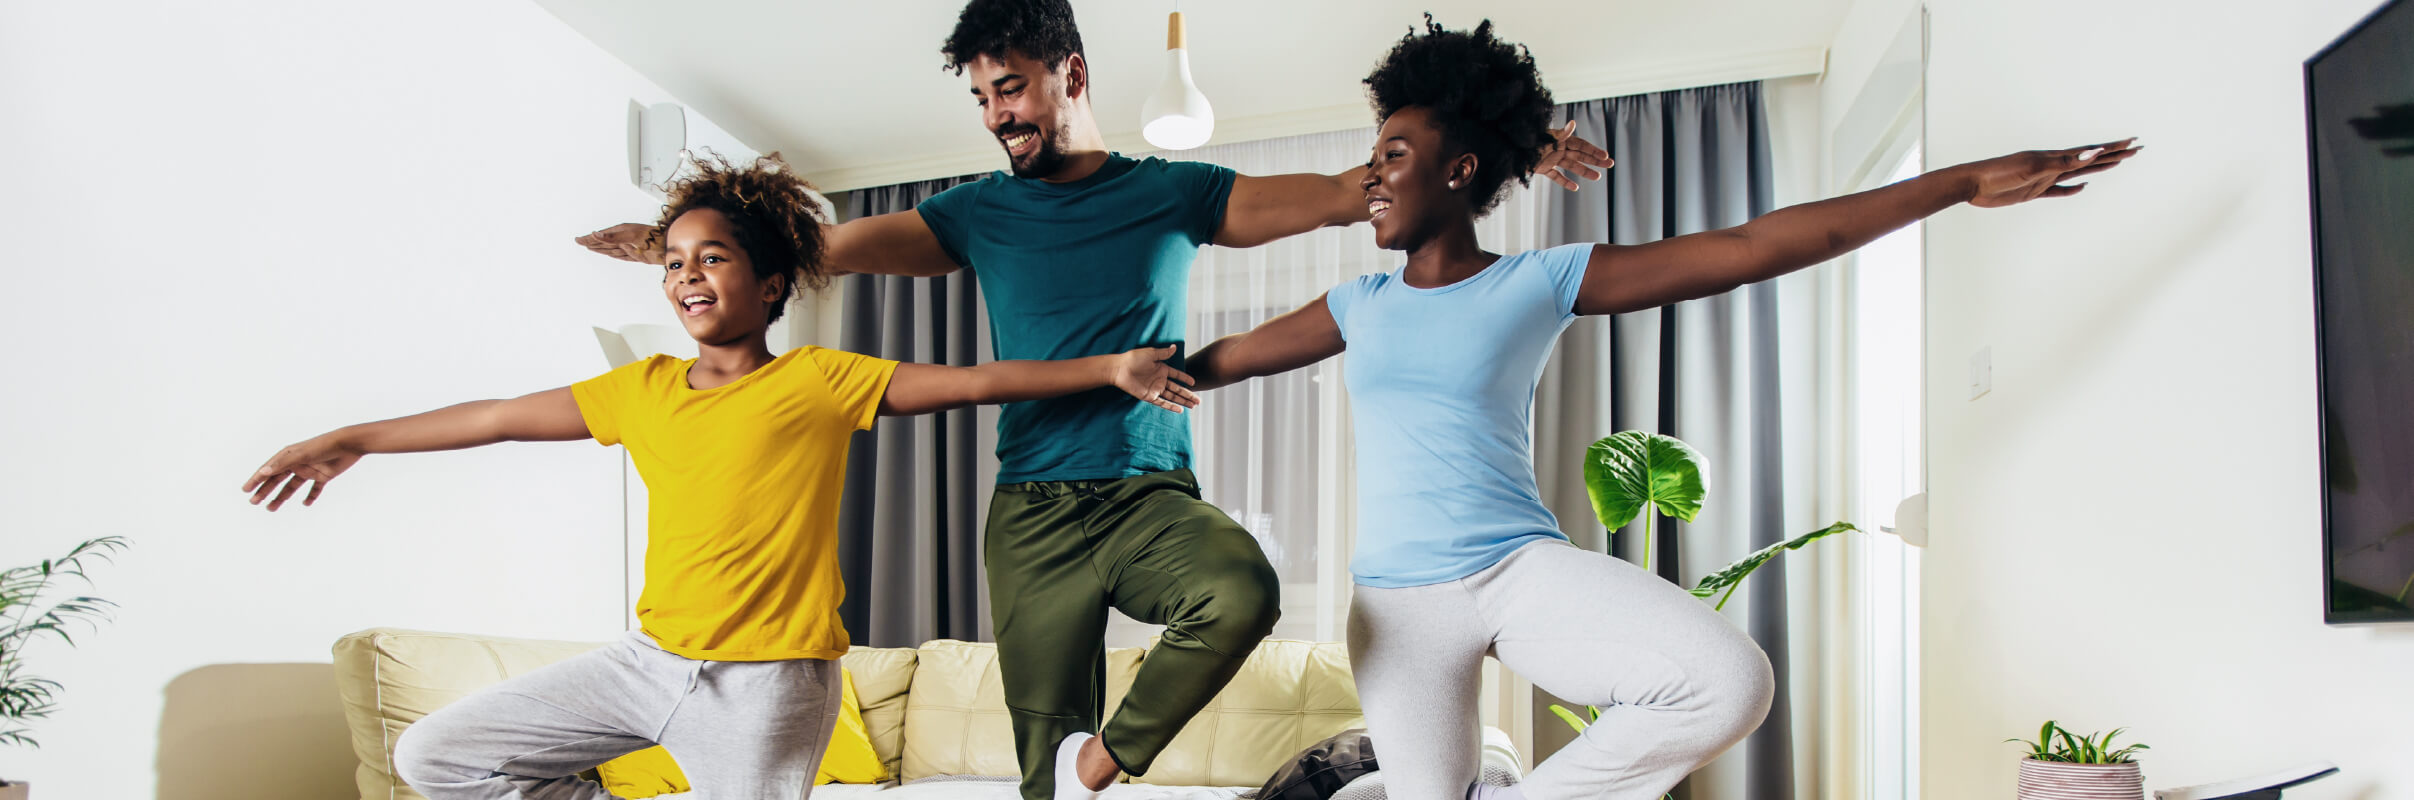 Family of three doing yoga in family room, smiling